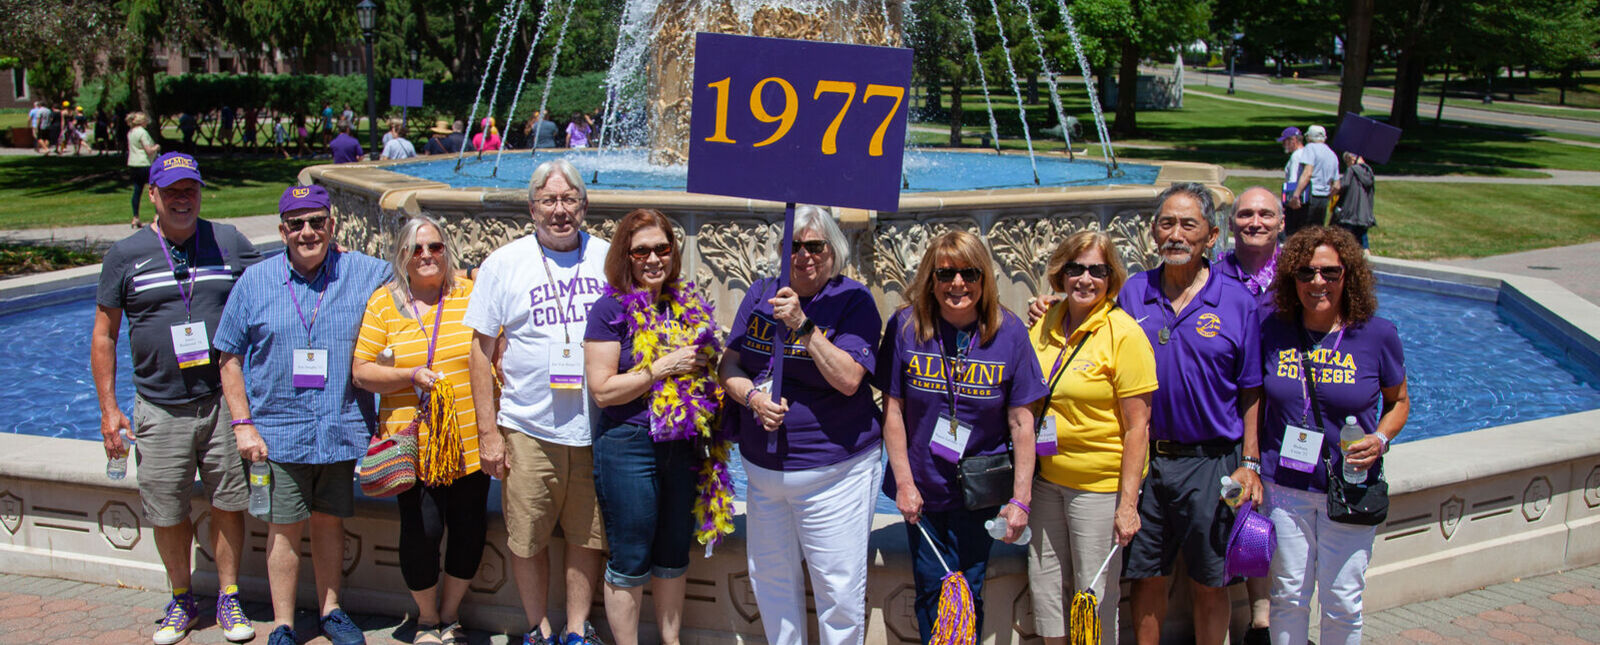 Members of the Class of 1977 stand in front of the fountain with a 1977 sign during reunion